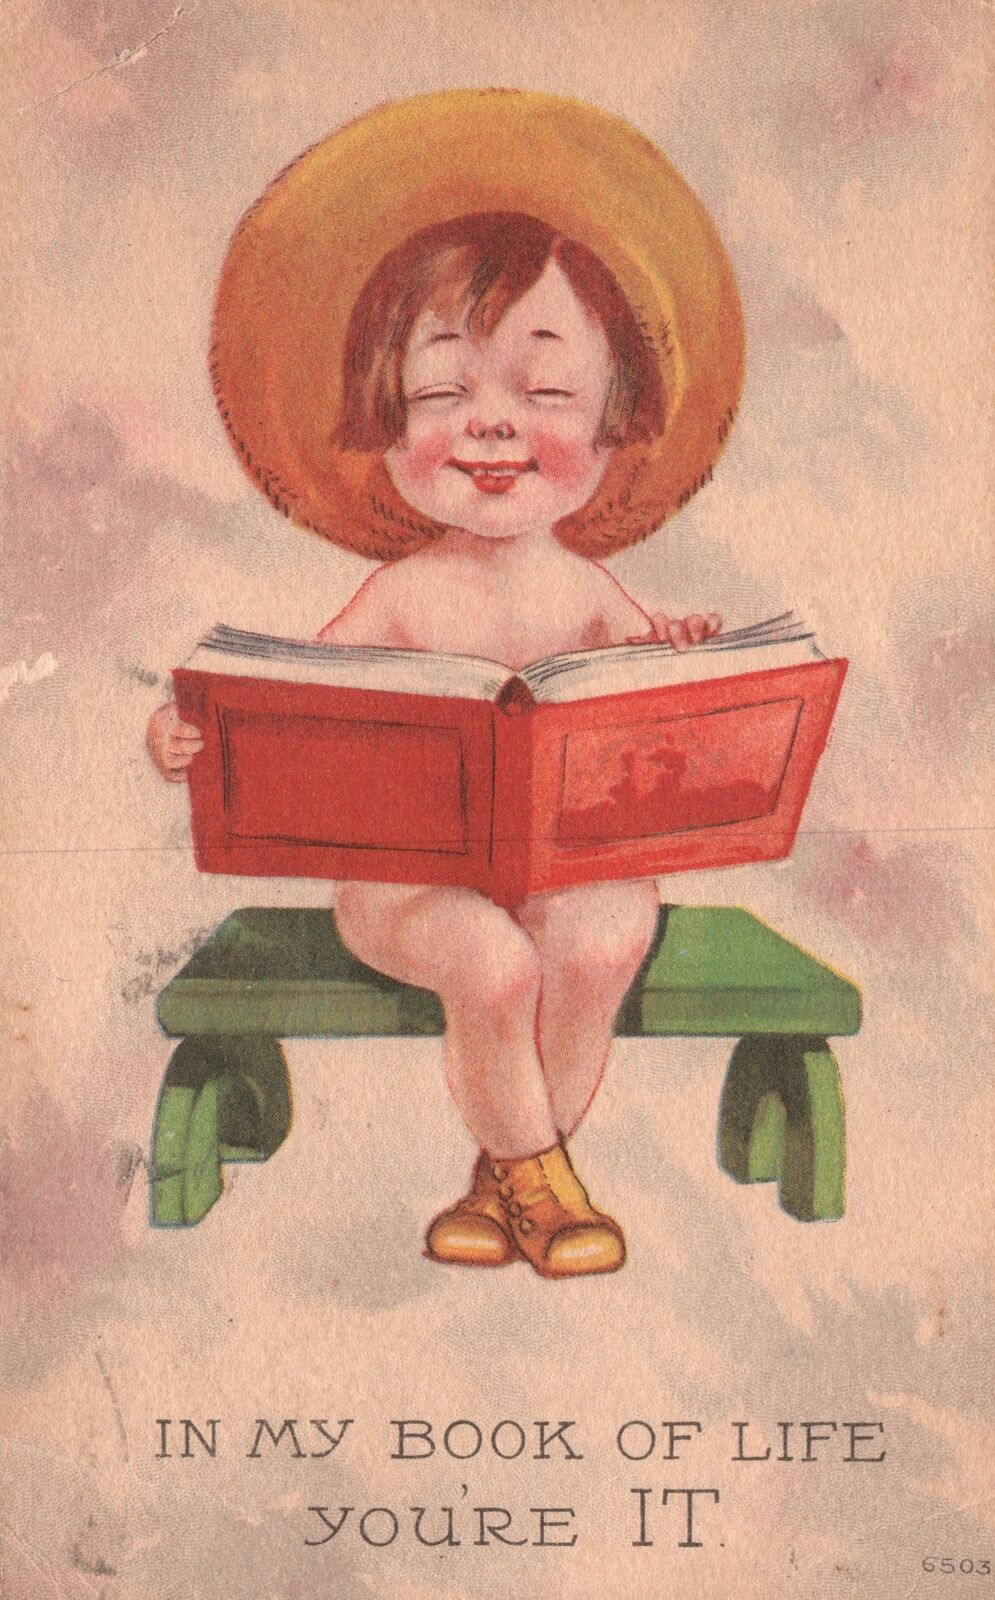 1918 Little Baby Reading Book Cute Smile My Book Of Life You're It, Postcard